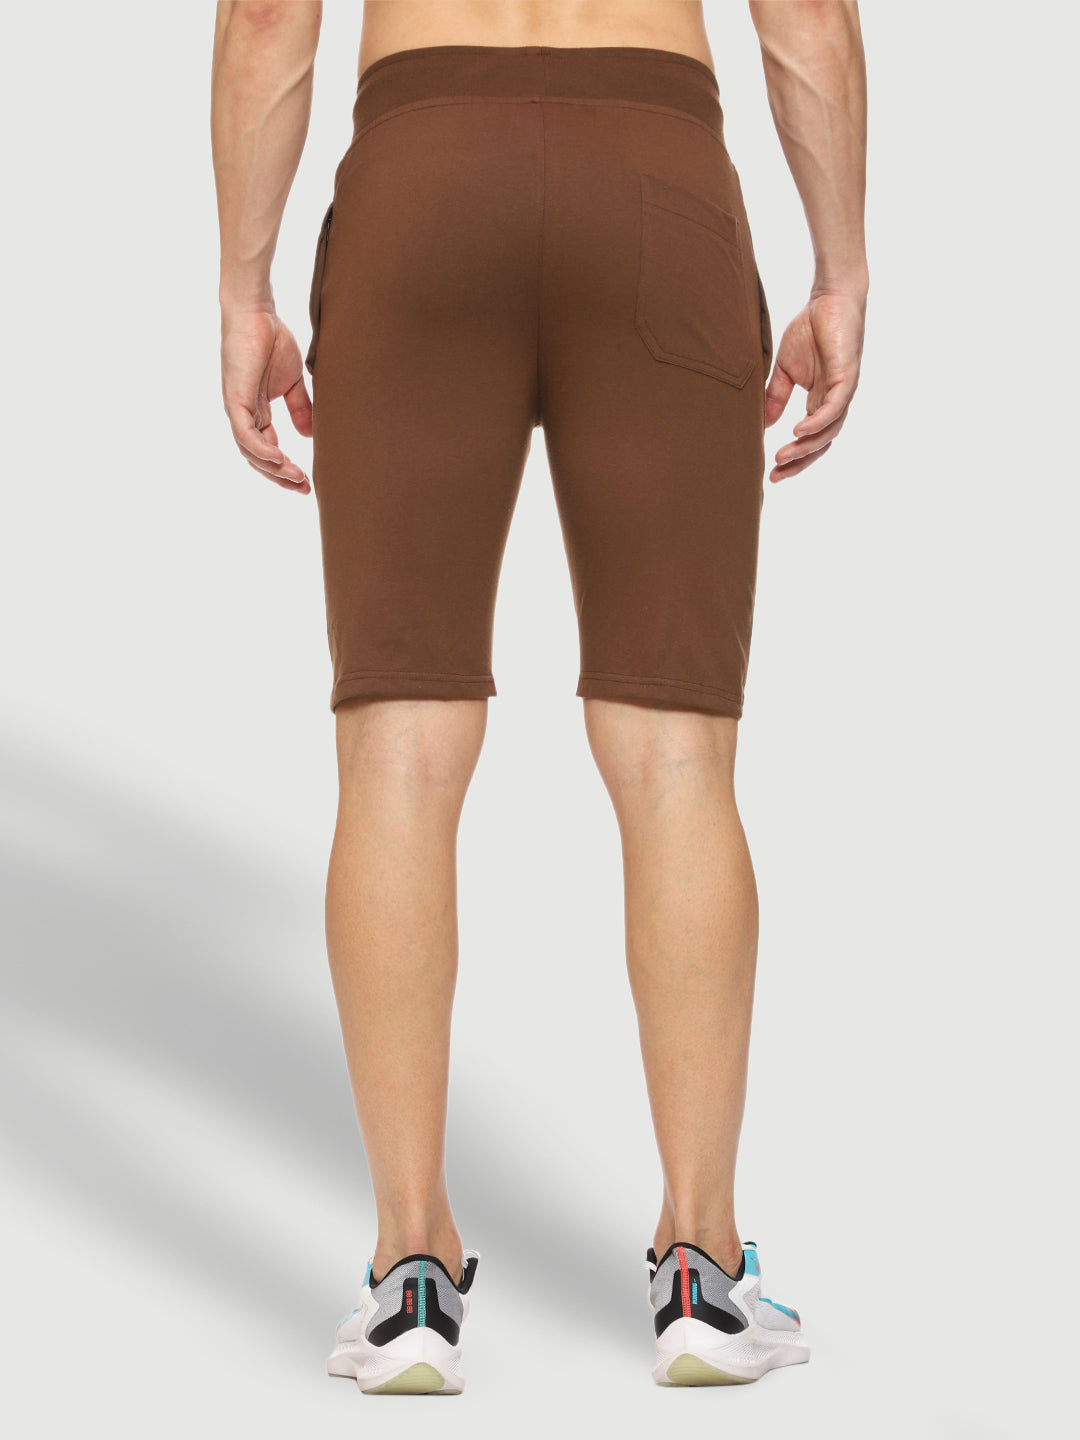 Stylish Brown Shorts For Men